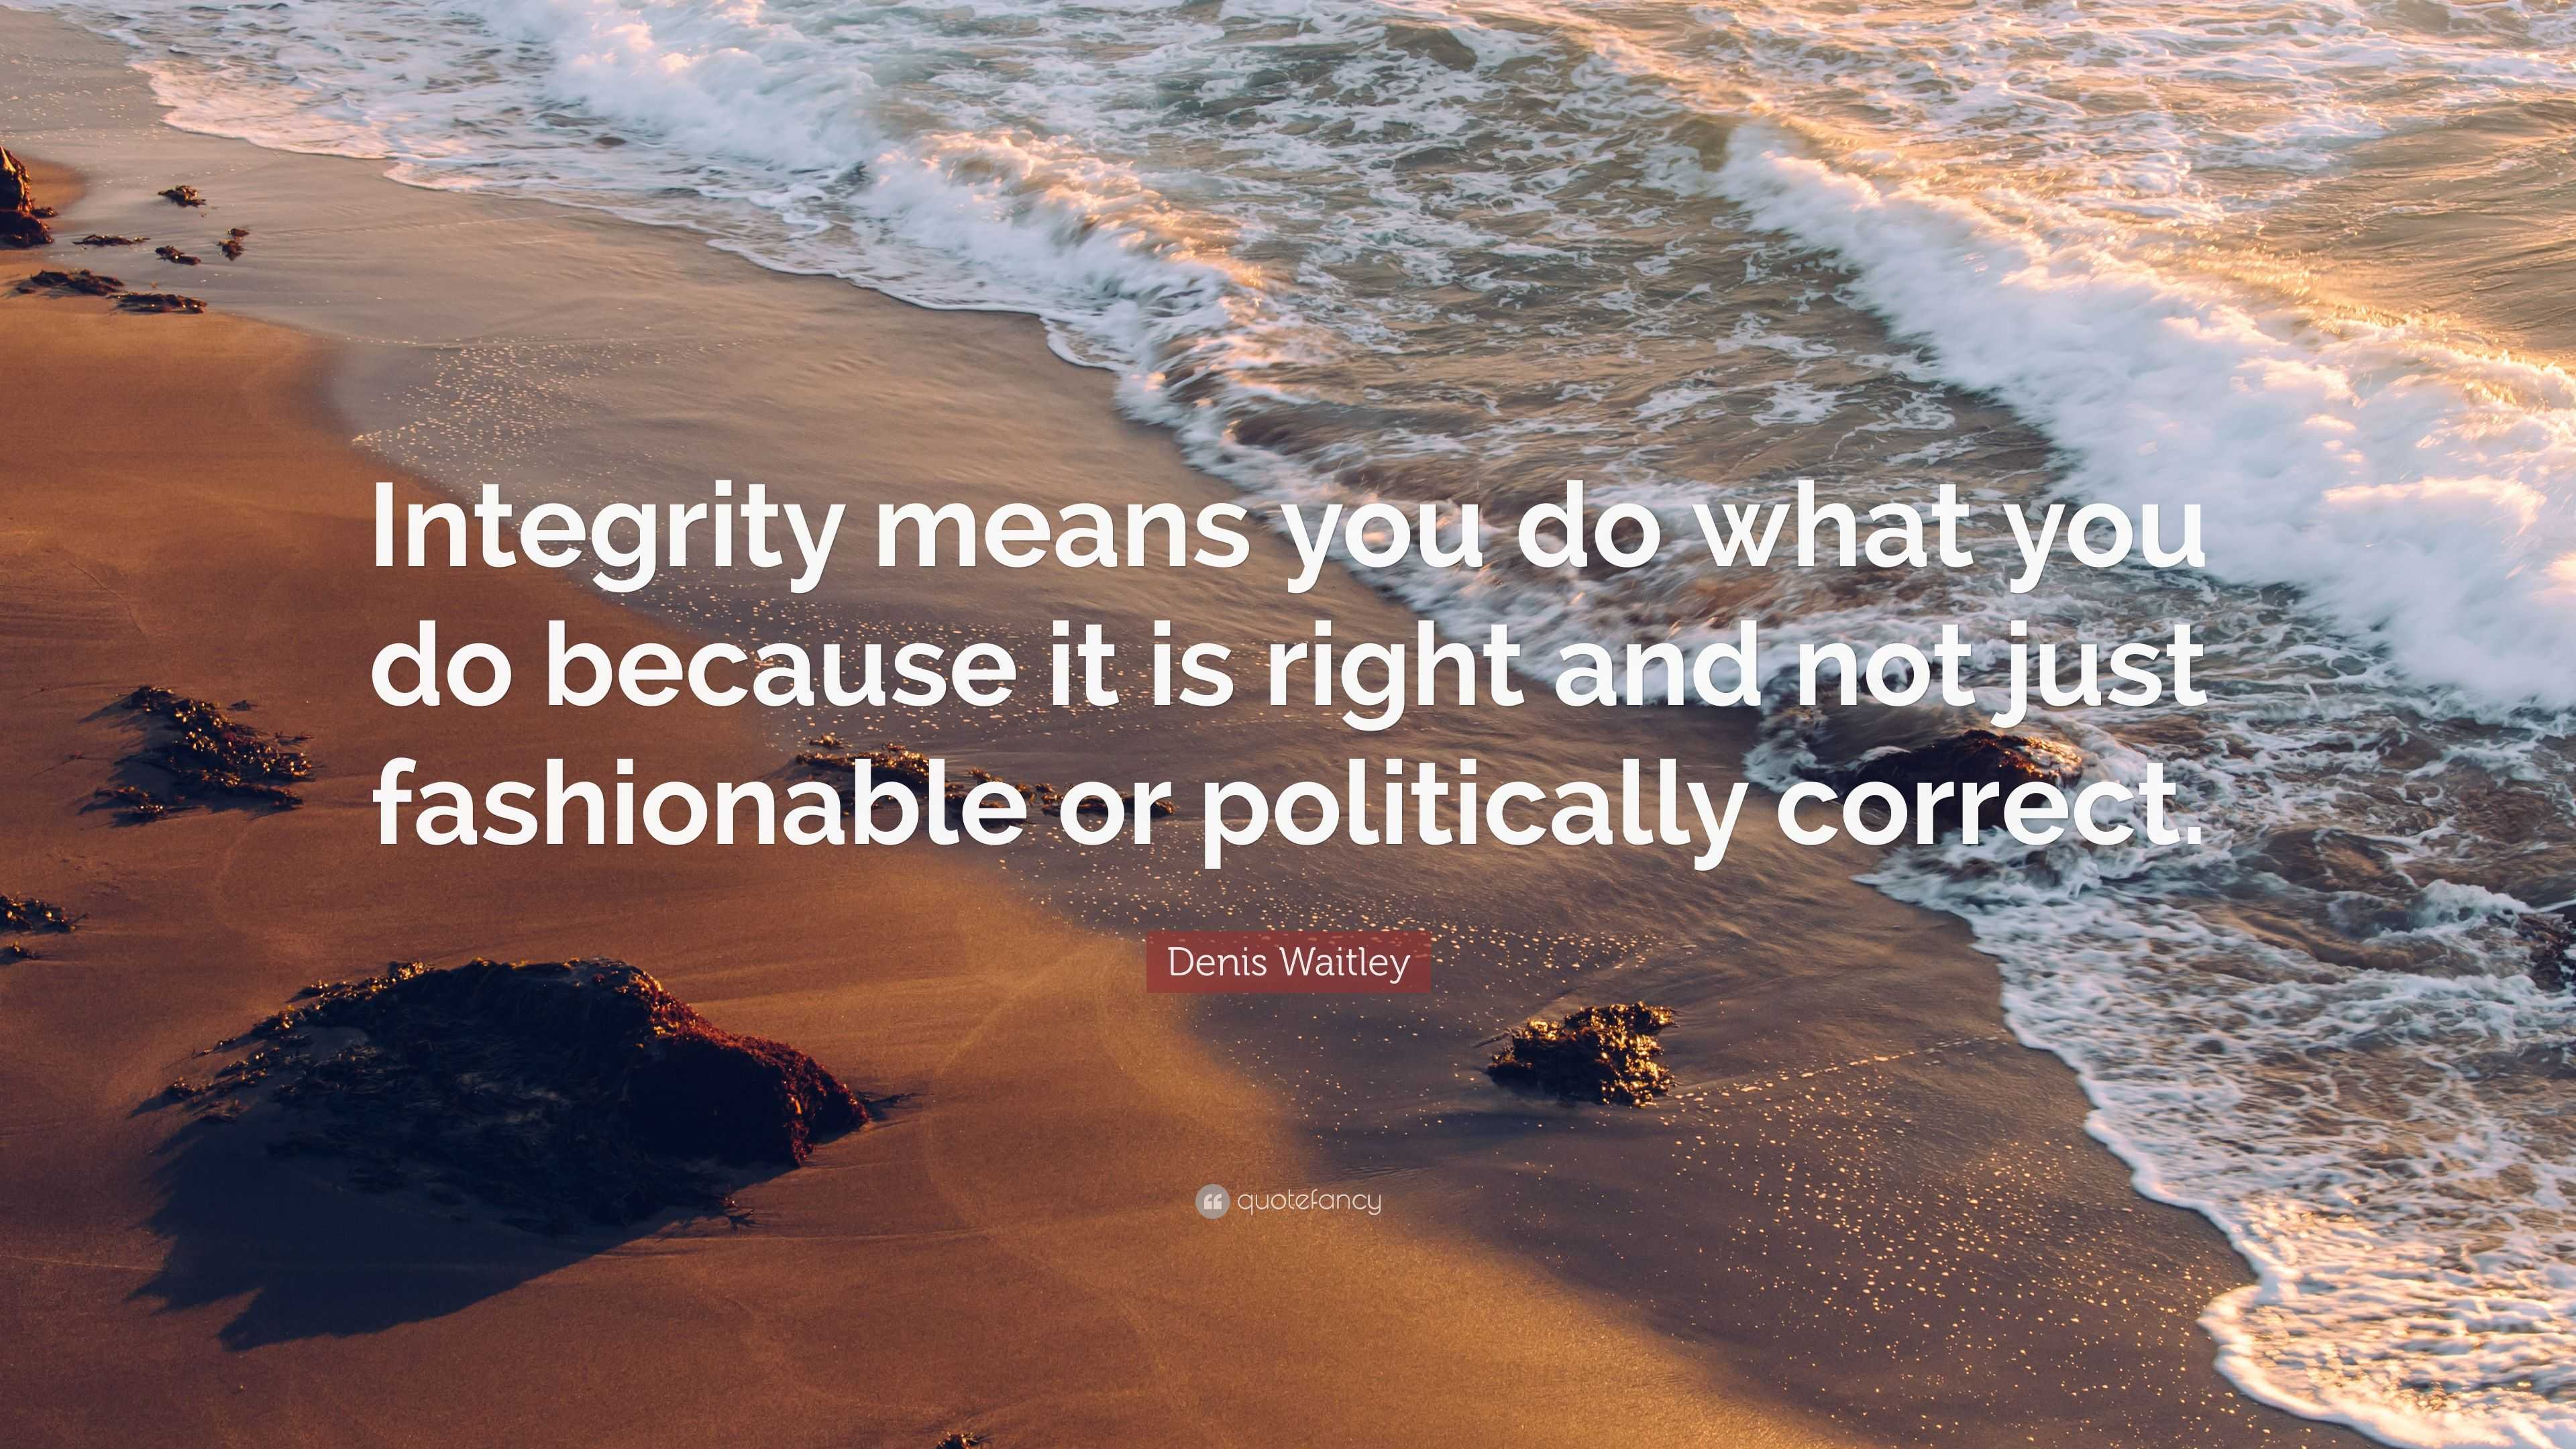 quotes on integrity by famous personalities        <h3 class=